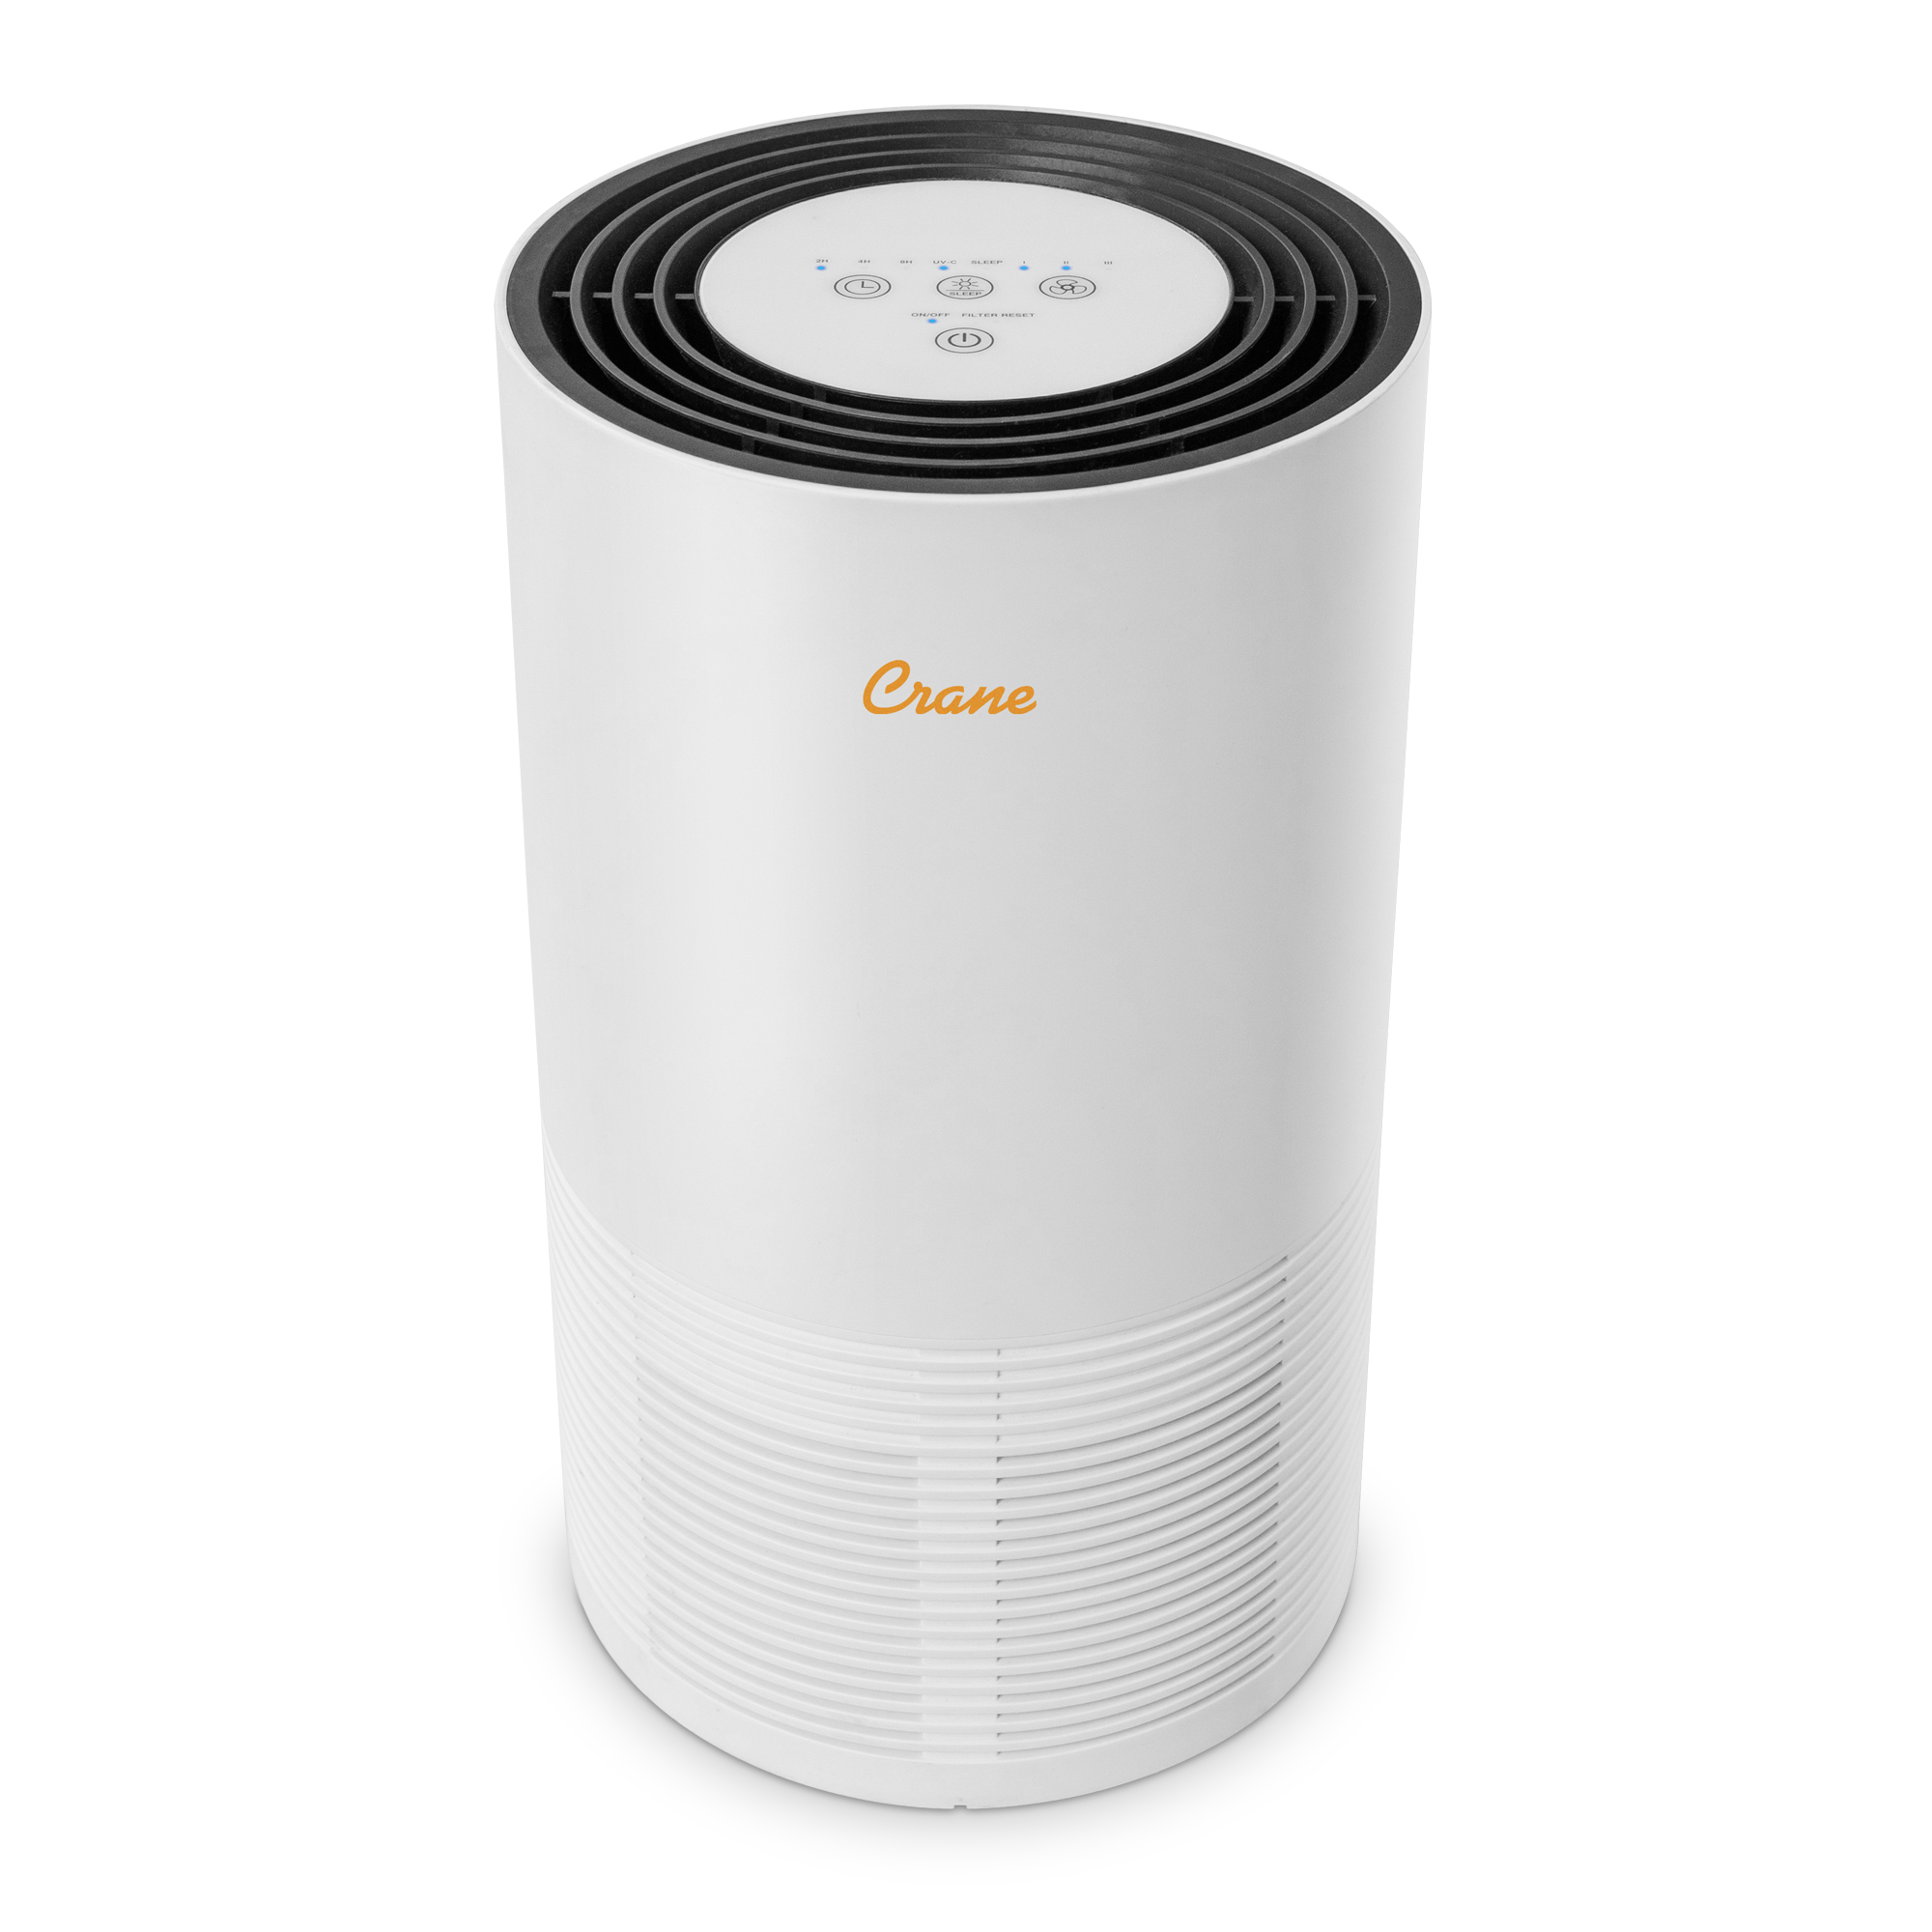 Air Purifier with UV Light & True HEPA, Up To 300 sq. ft.